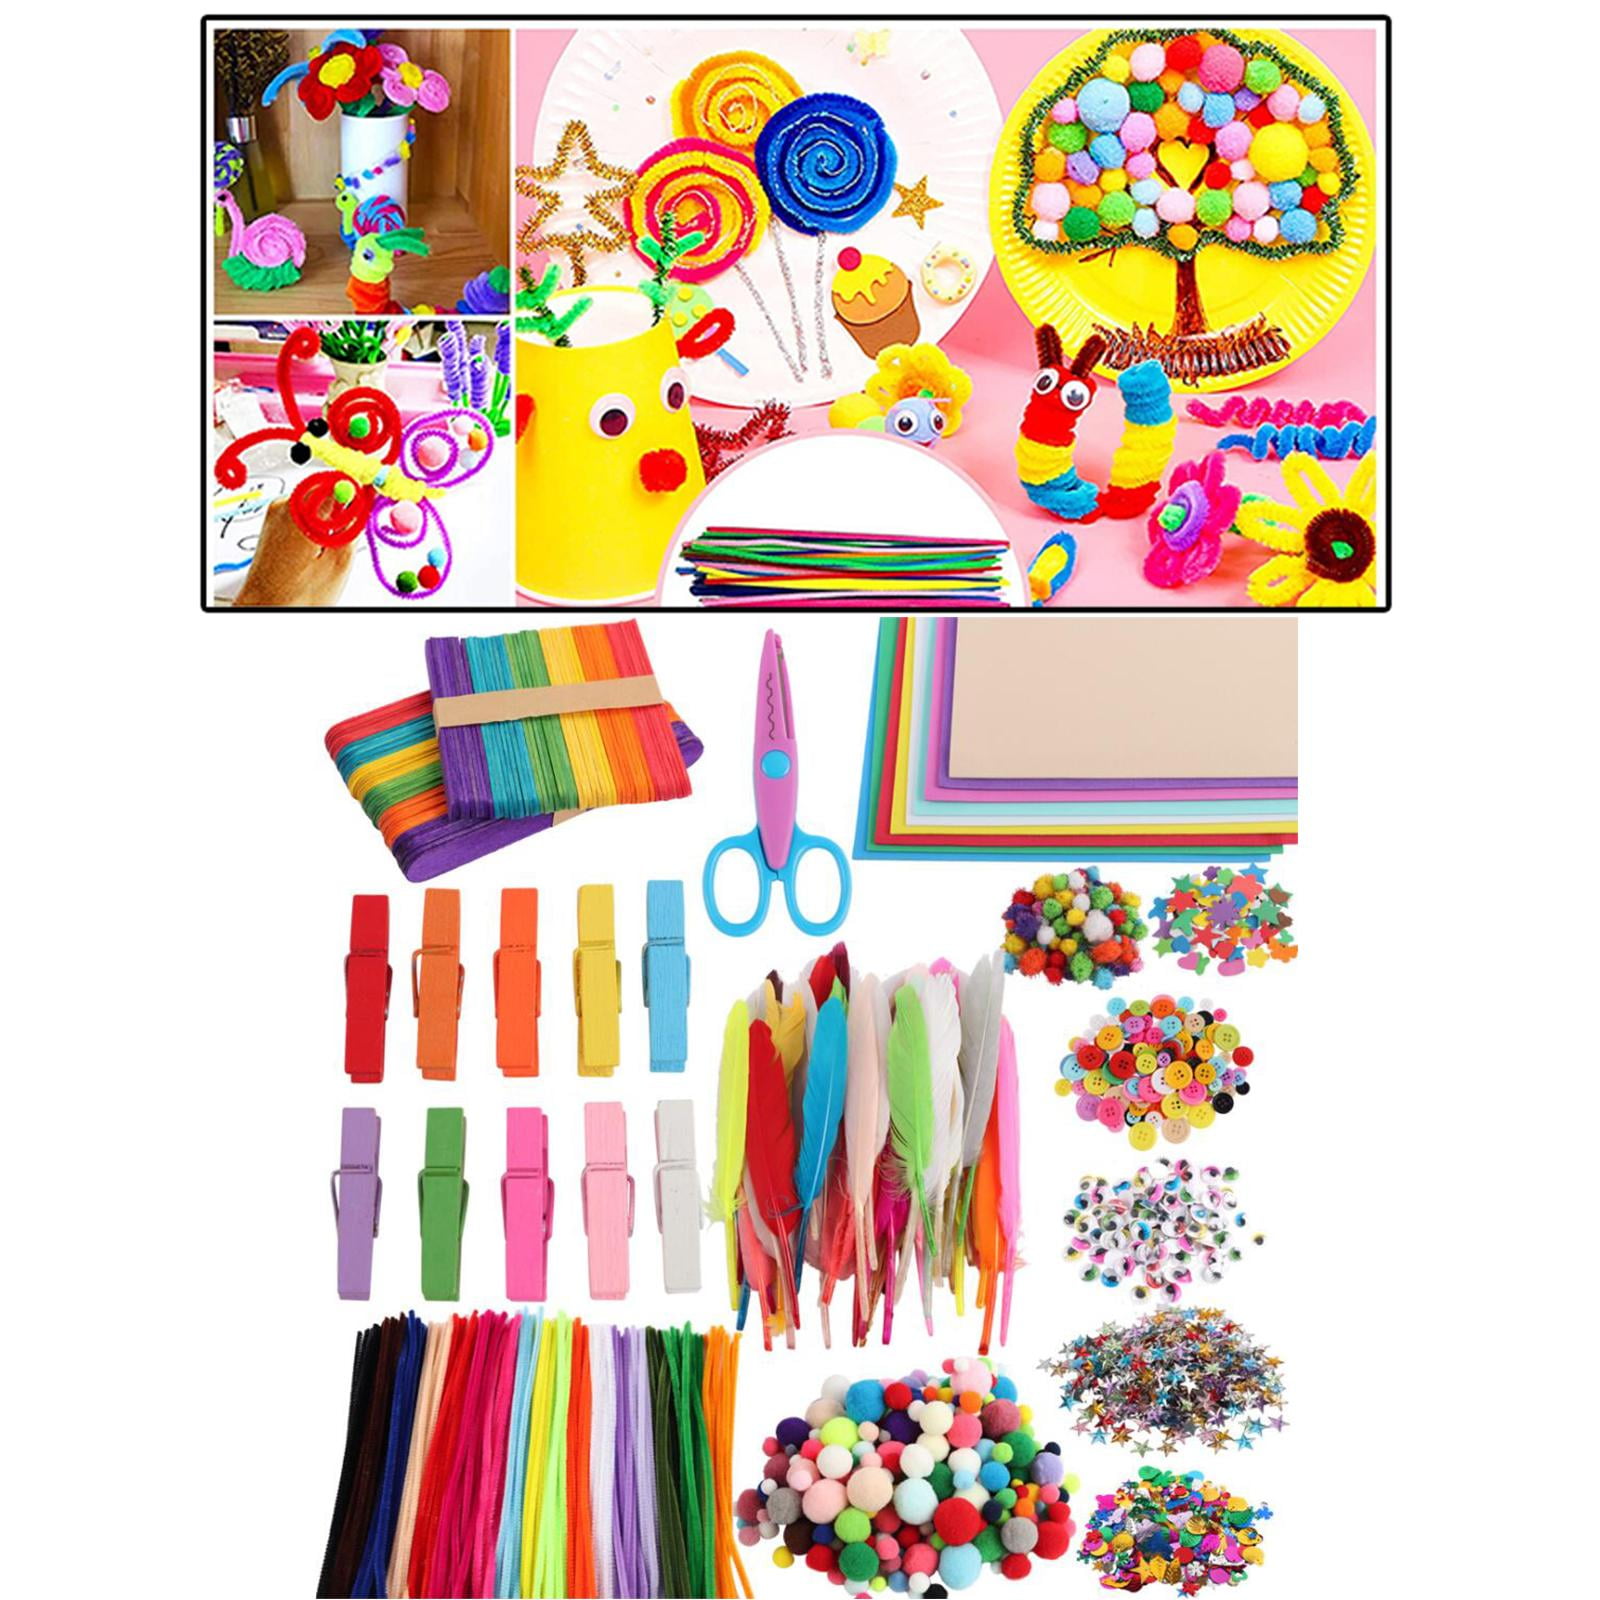  50 Arts And Crafts For Kids, 400 Pieces Art Supplies Craft  Materials, 7 Year Old Gifts For Girls + Boys Ages, 4-6 6-8